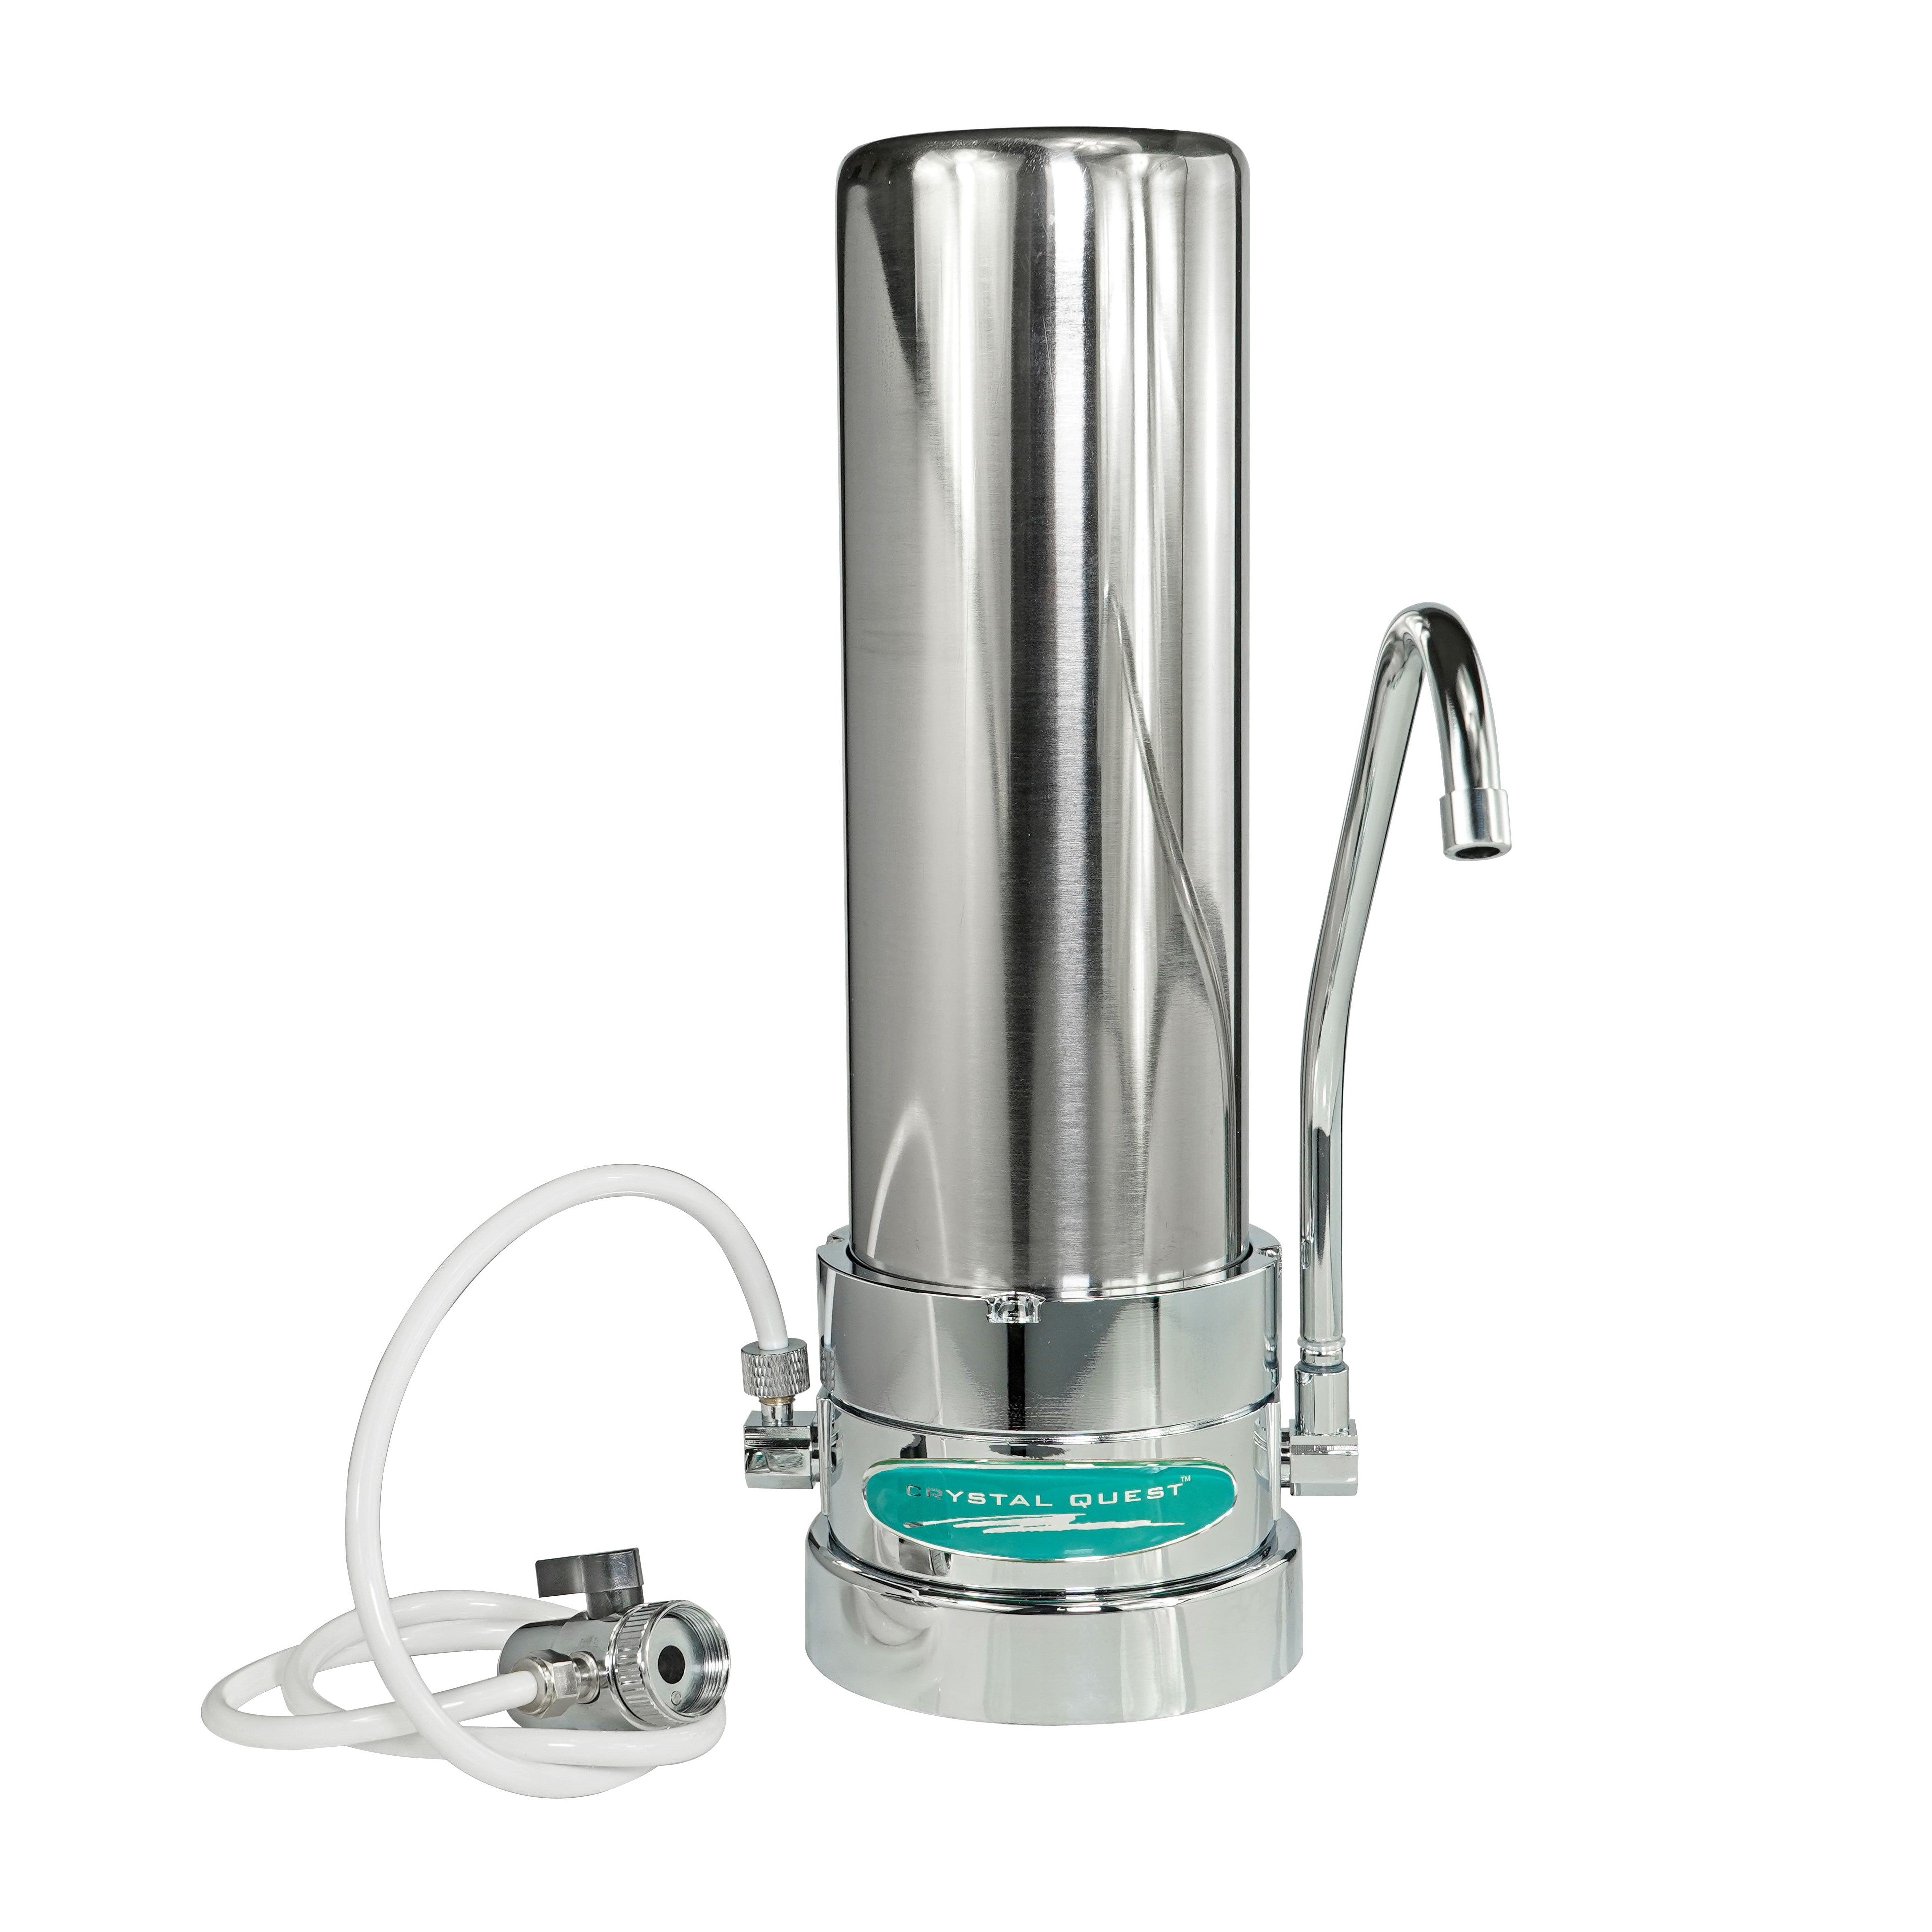 Single / Stainless Steel Nitrate Countertop Water Filter System - Countertop Water Filters - Crystal Quest